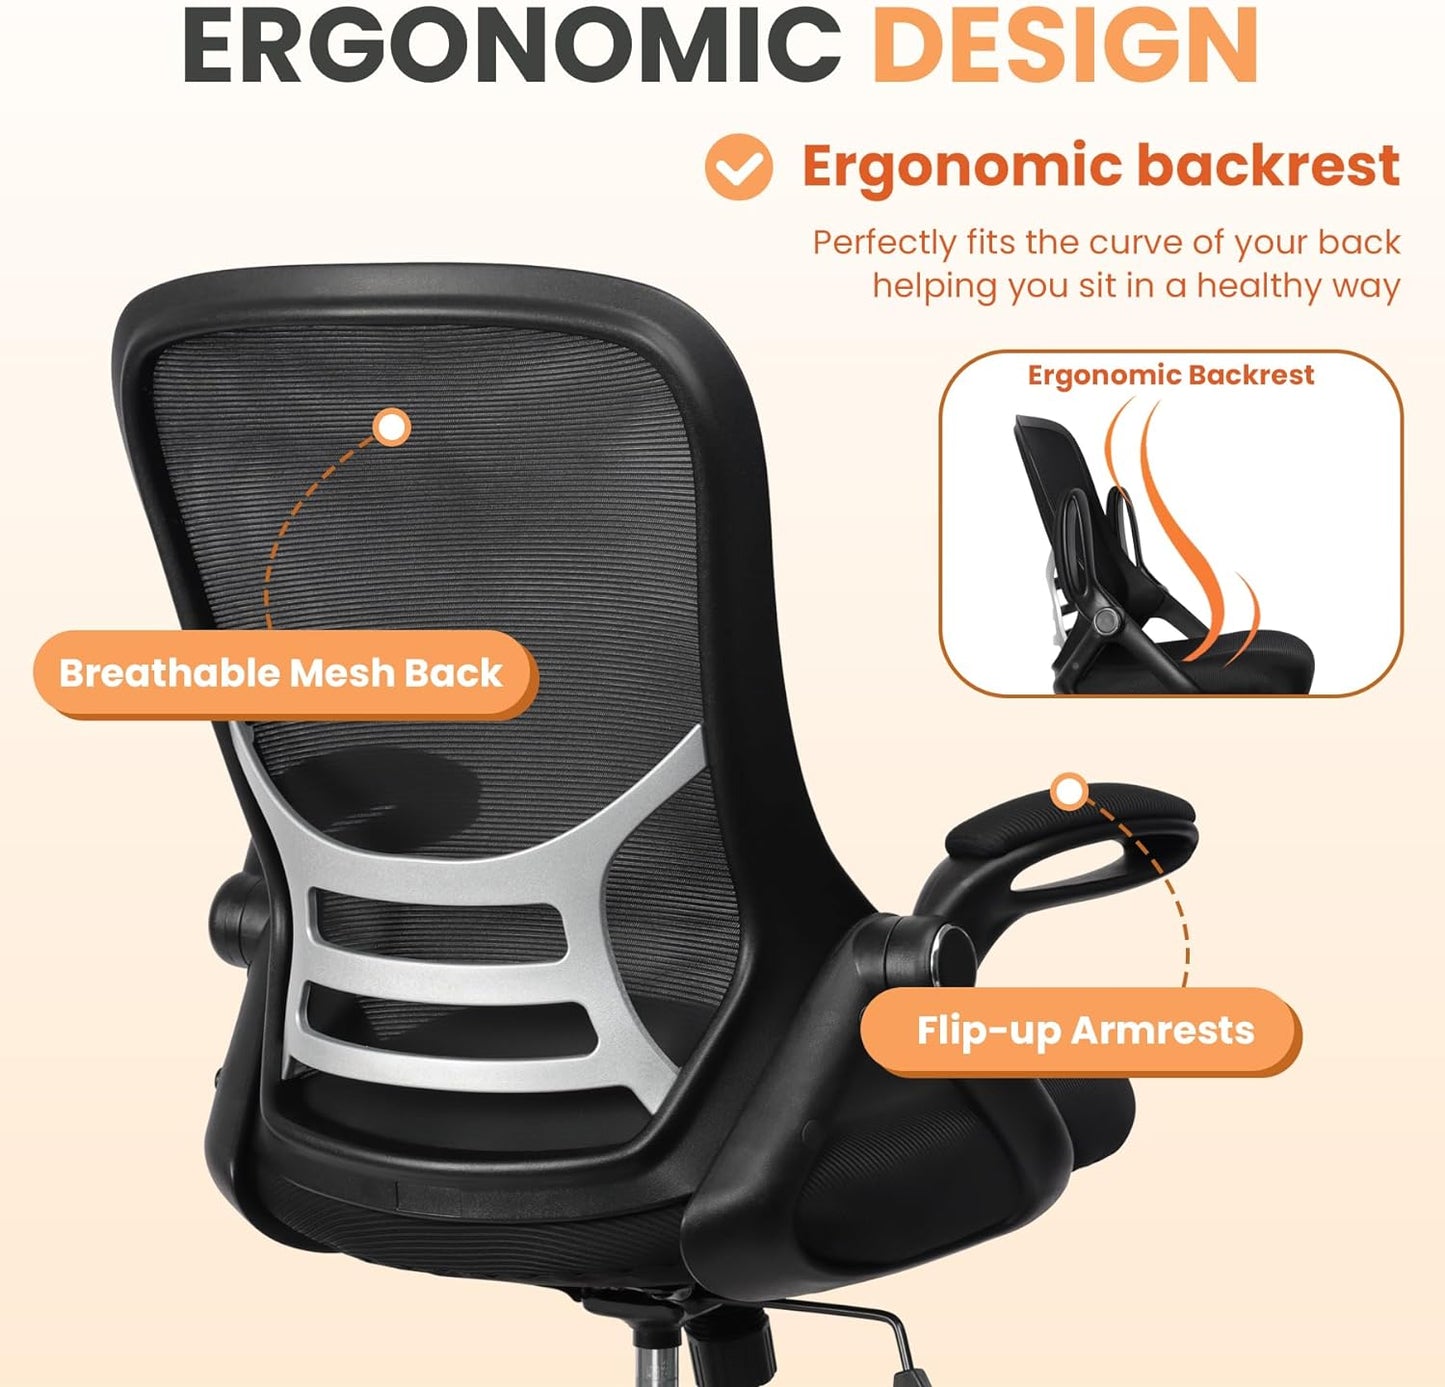 HYLONE Drafting Chair Tall Office Chair, High Ergonomic Standing Desk Computer Stools with Rubber Wheels, Flip-up Armrests, Adjustable Height and Foot-Ring, Comfortable Mesh Fabric, Black